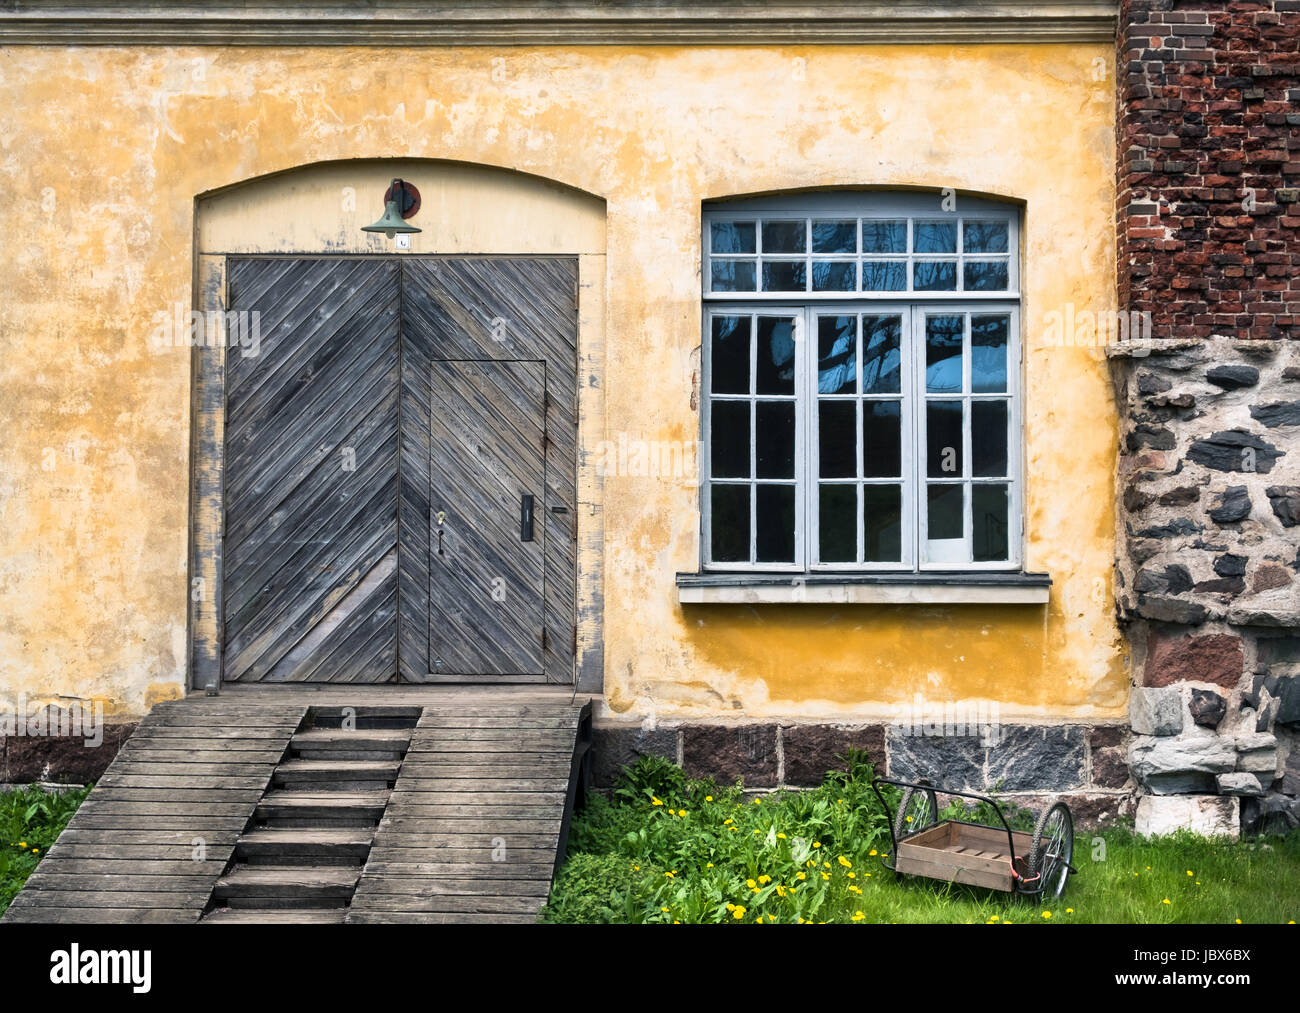 Some intresting views on old historical building with door and window in Suomenlinna (Sveaborg), Helsinki, Finland Stock Photo